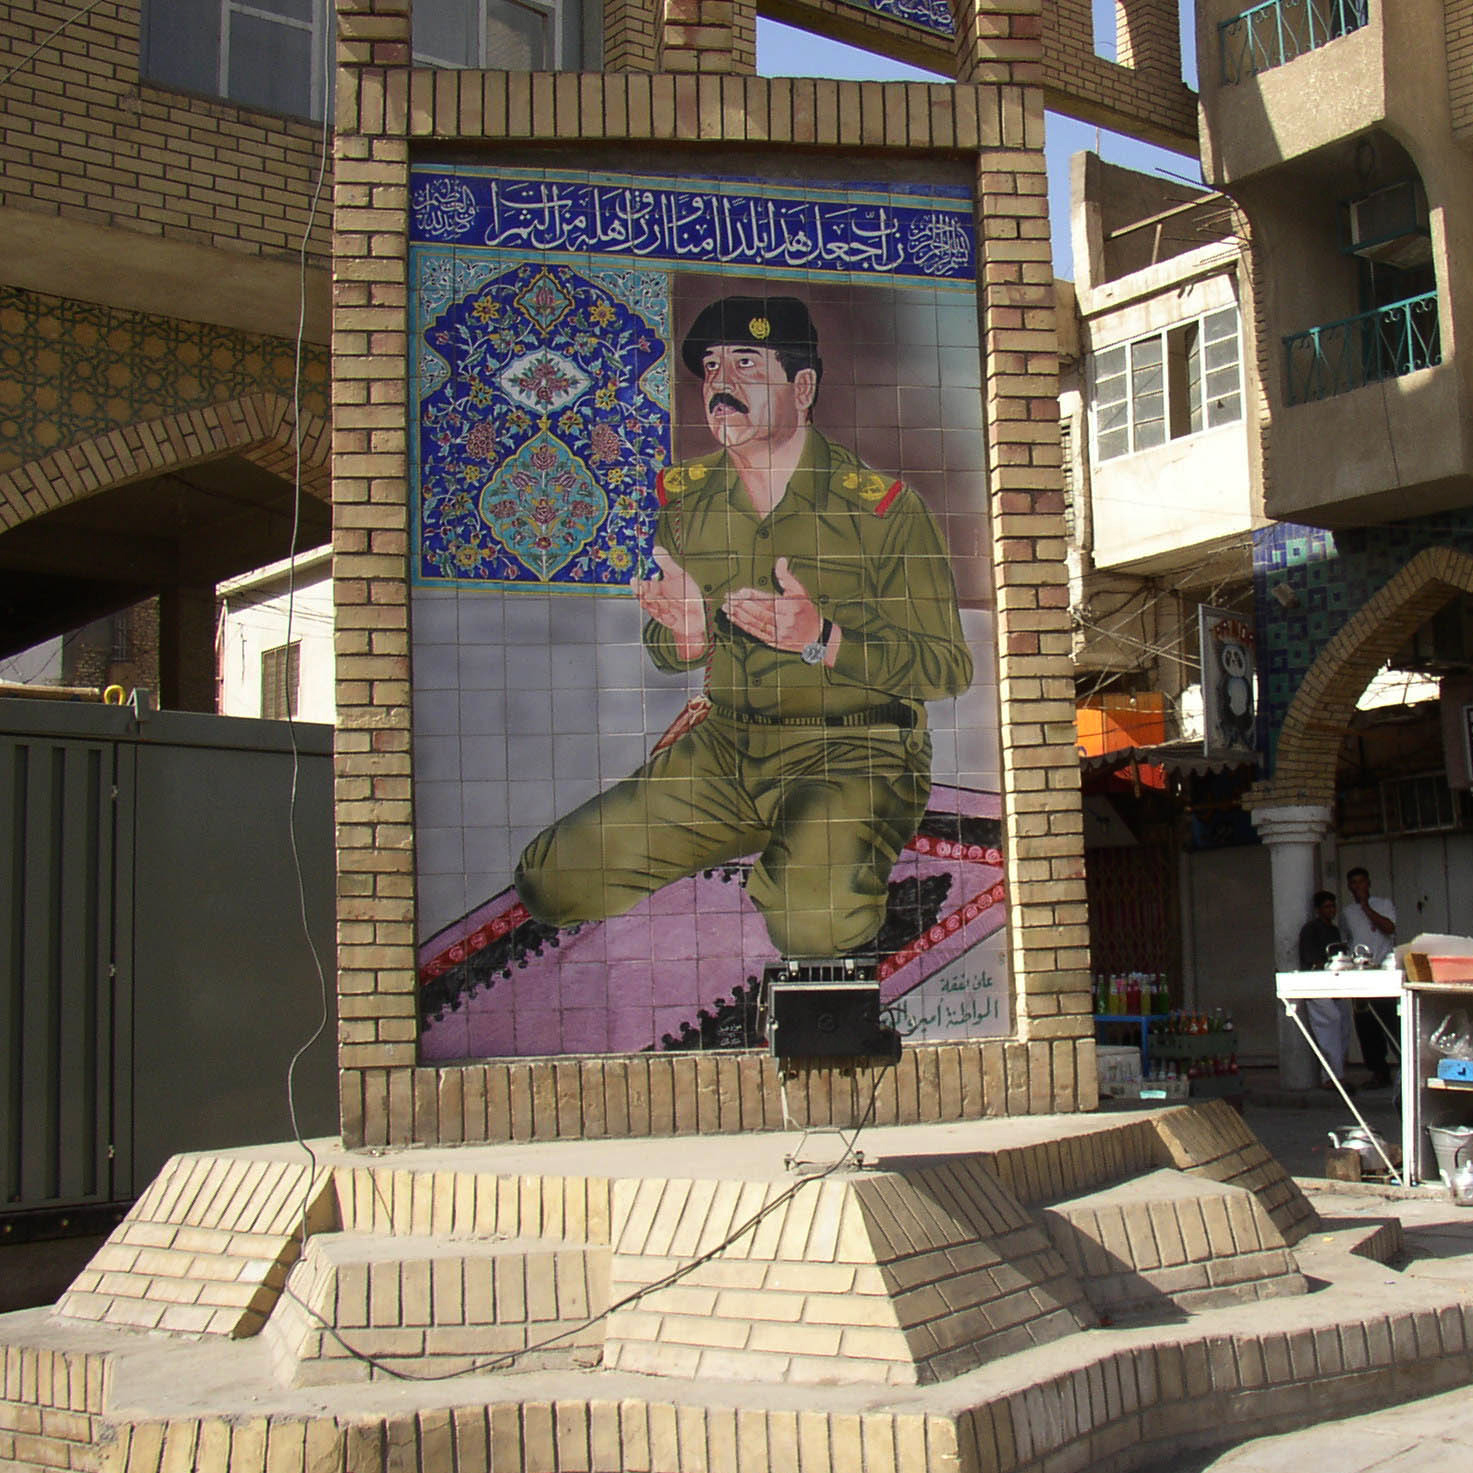 A now-destroyed tile mural showing Saddam Hussein, a Sunni who treated Shi’ites brutally and was despised by Karbala’s residents, praying in a military uniform, in the holy Shi'ite city of Karbala. (Vivienne Walt)